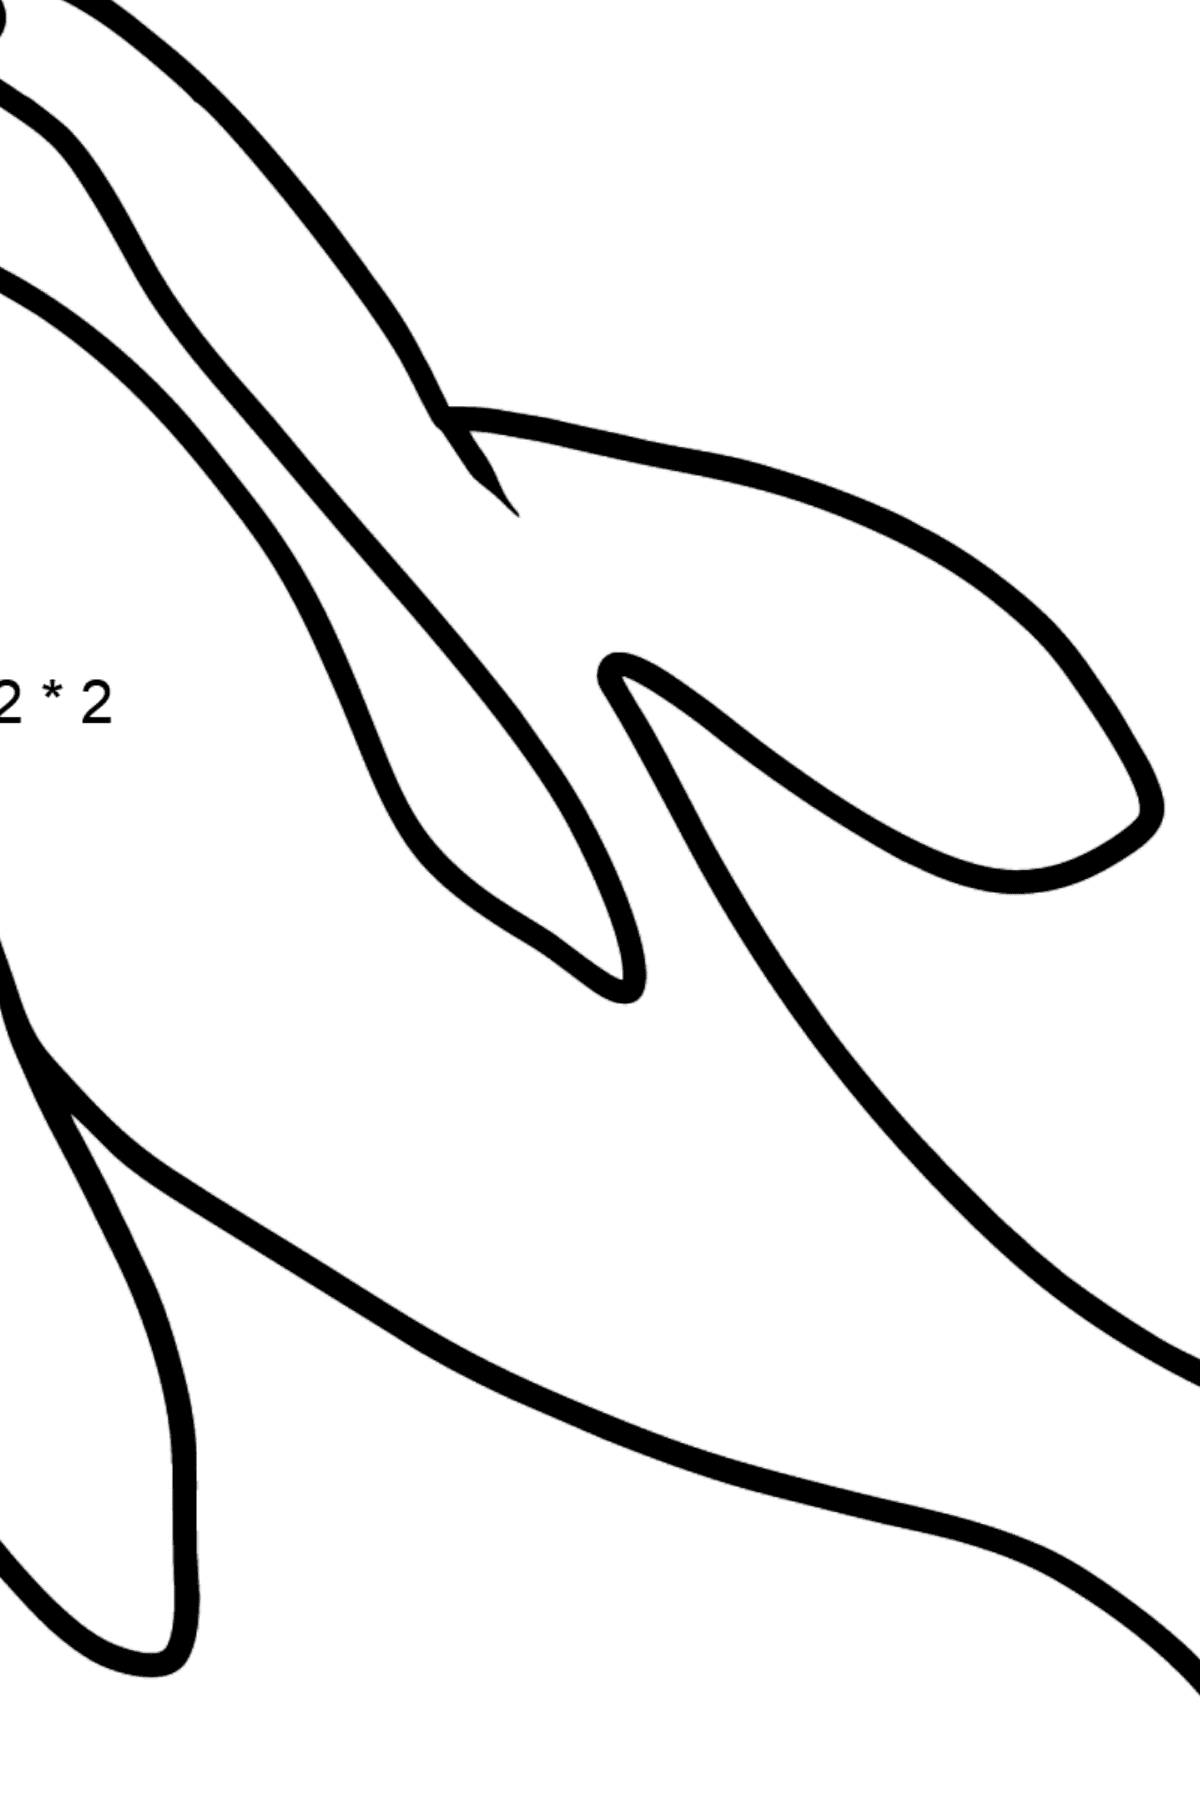 Dolphin coloring page - Math Coloring - Multiplication for Kids